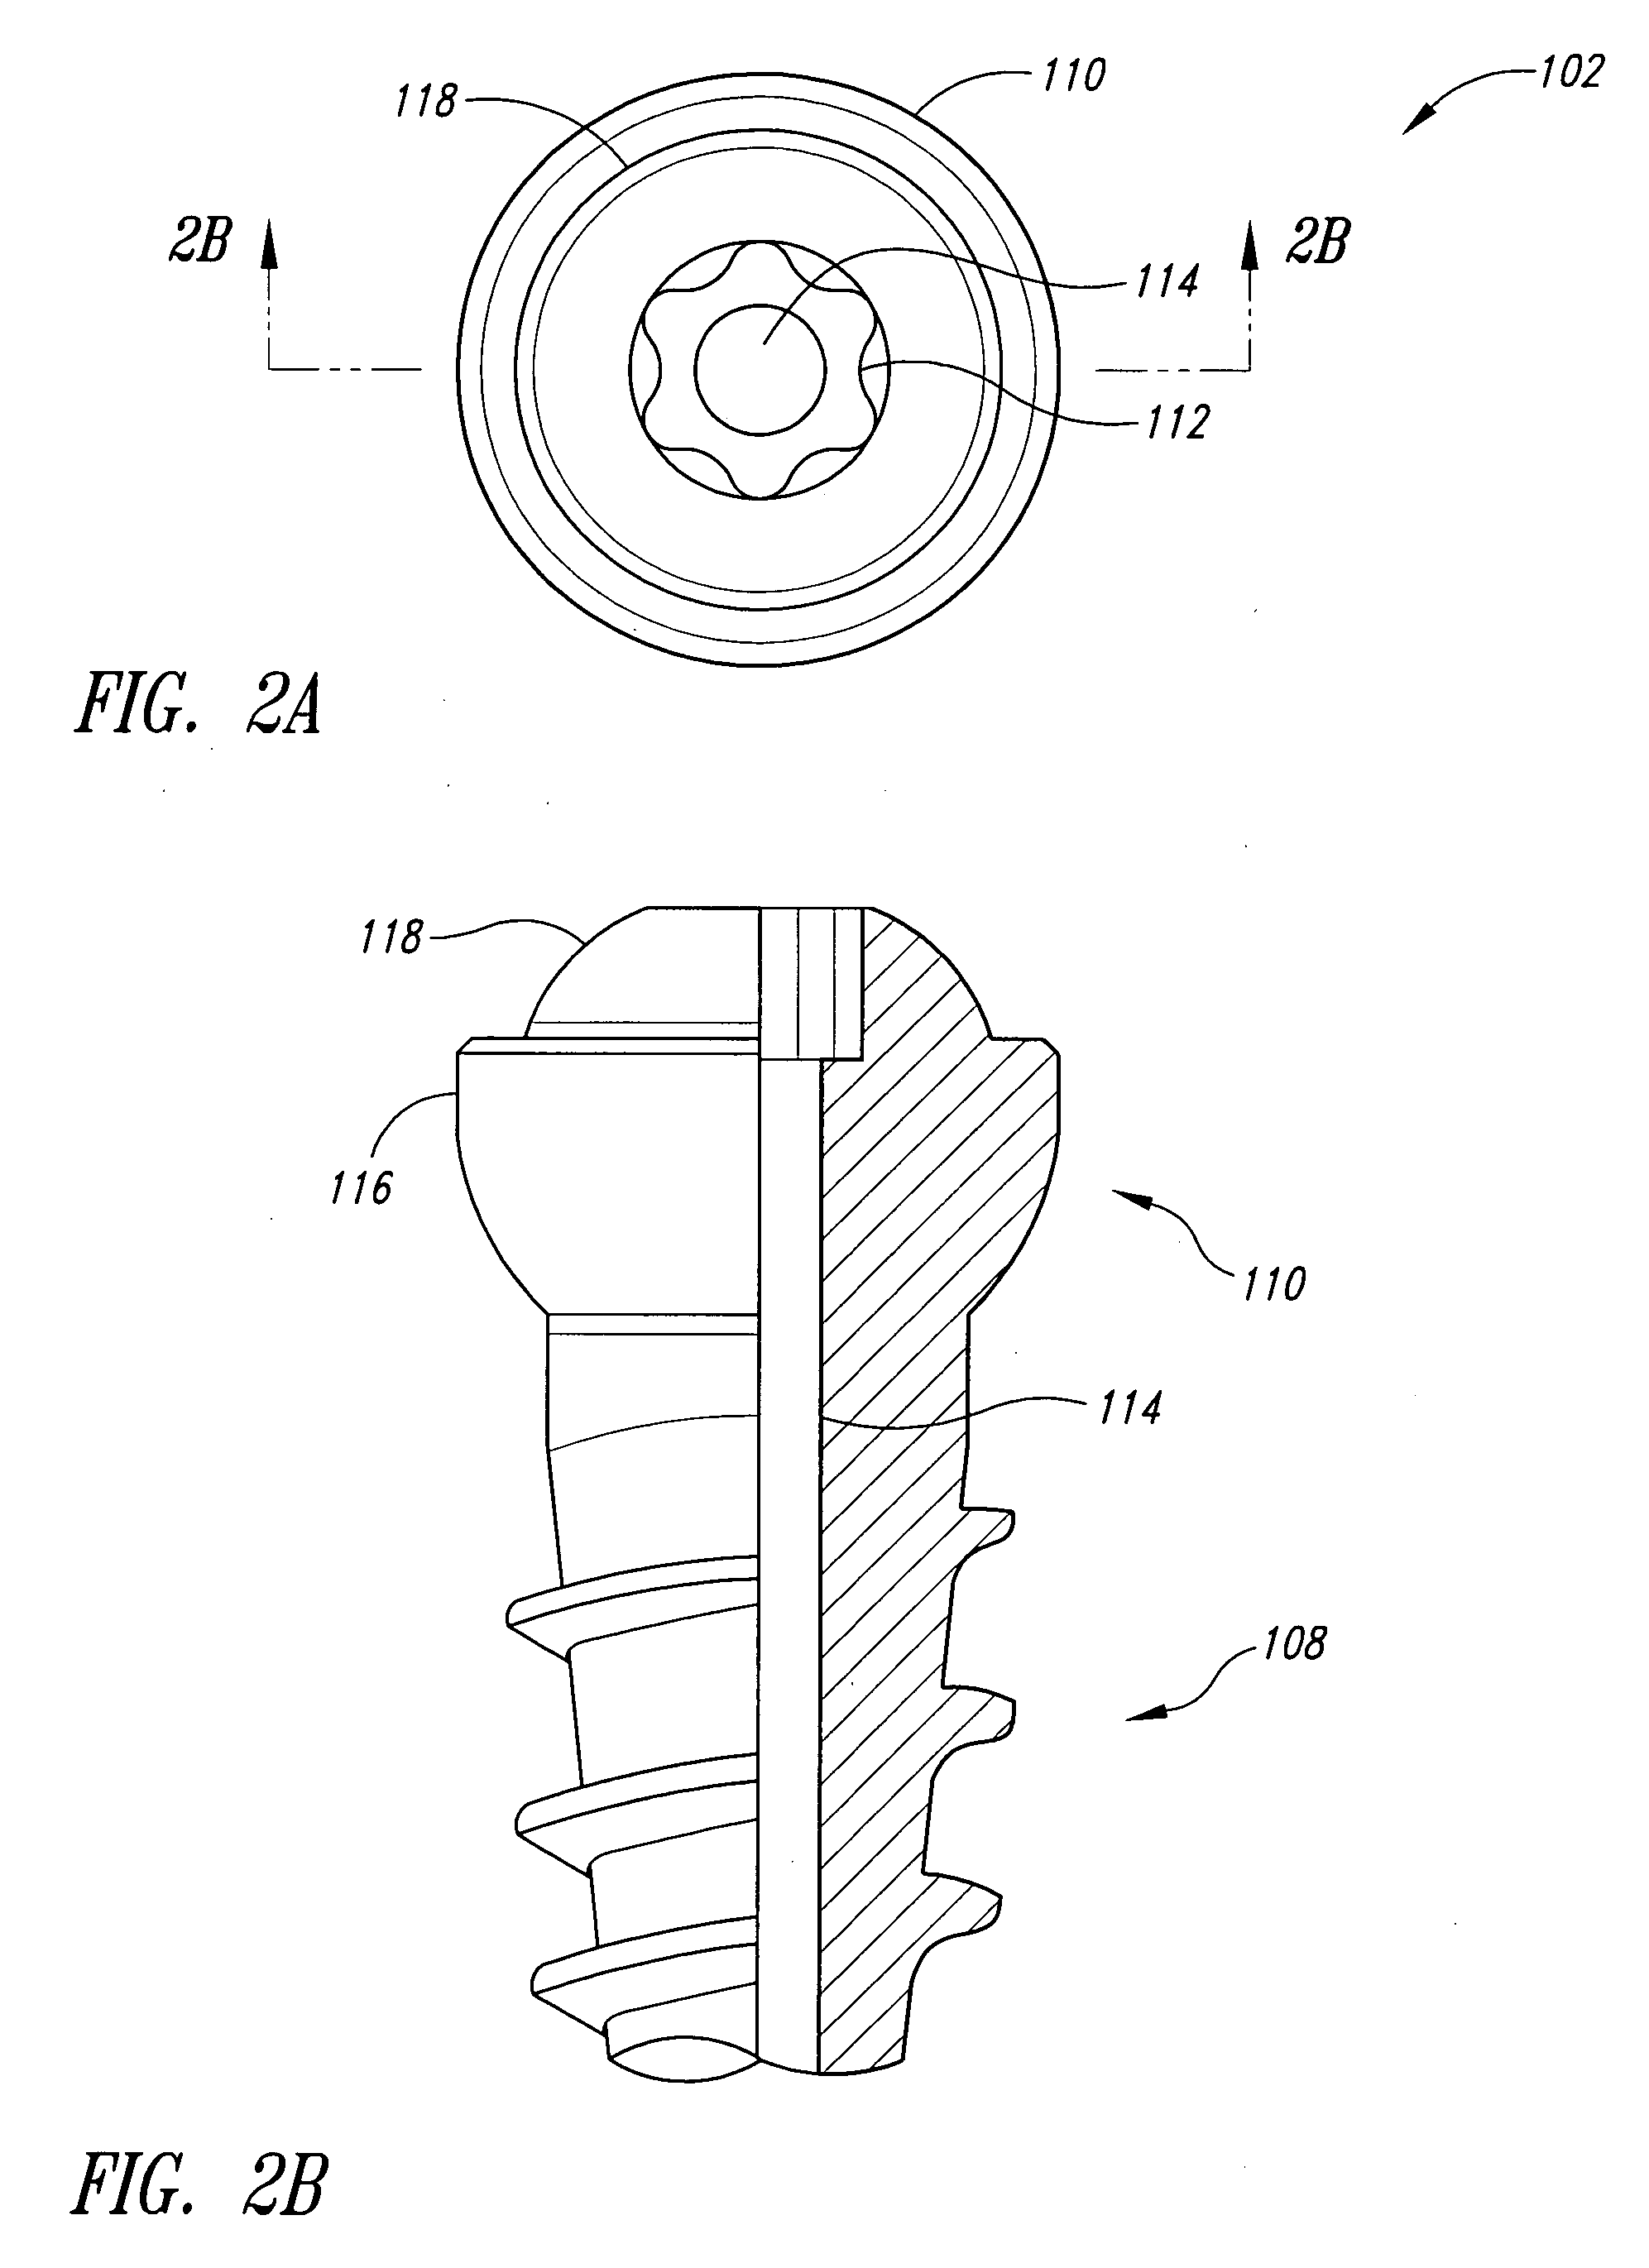 Bone fixation systems and methods of assembling and/or installing the same